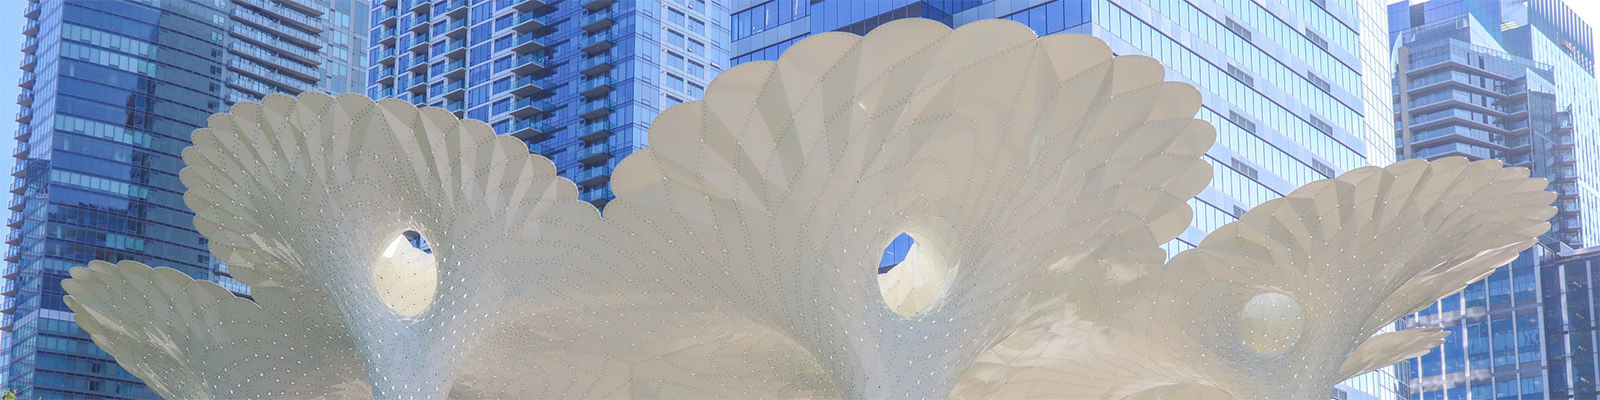 The white, organic, fluted top of the sculpture Piloti in the foreground is juxtaposed with the rigid lines of the glass skyscrapers in the background.